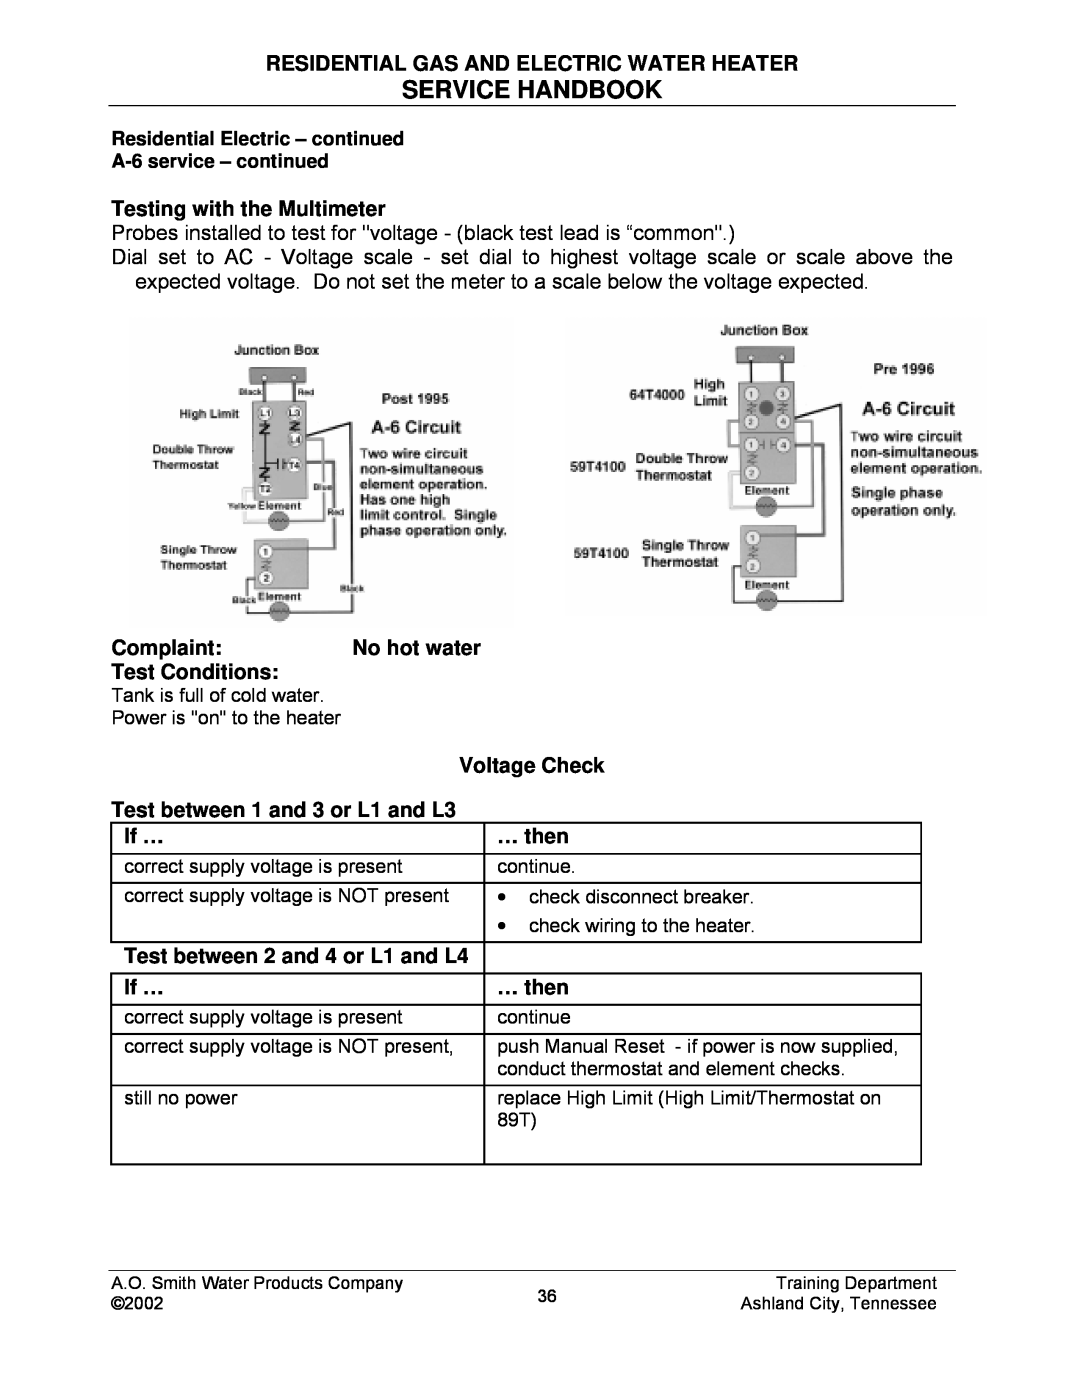 A.O. Smith TC-049-R2 Service Handbook, Residential Gas And Electric Water Heater, Testing with the Multimeter, Complaint 